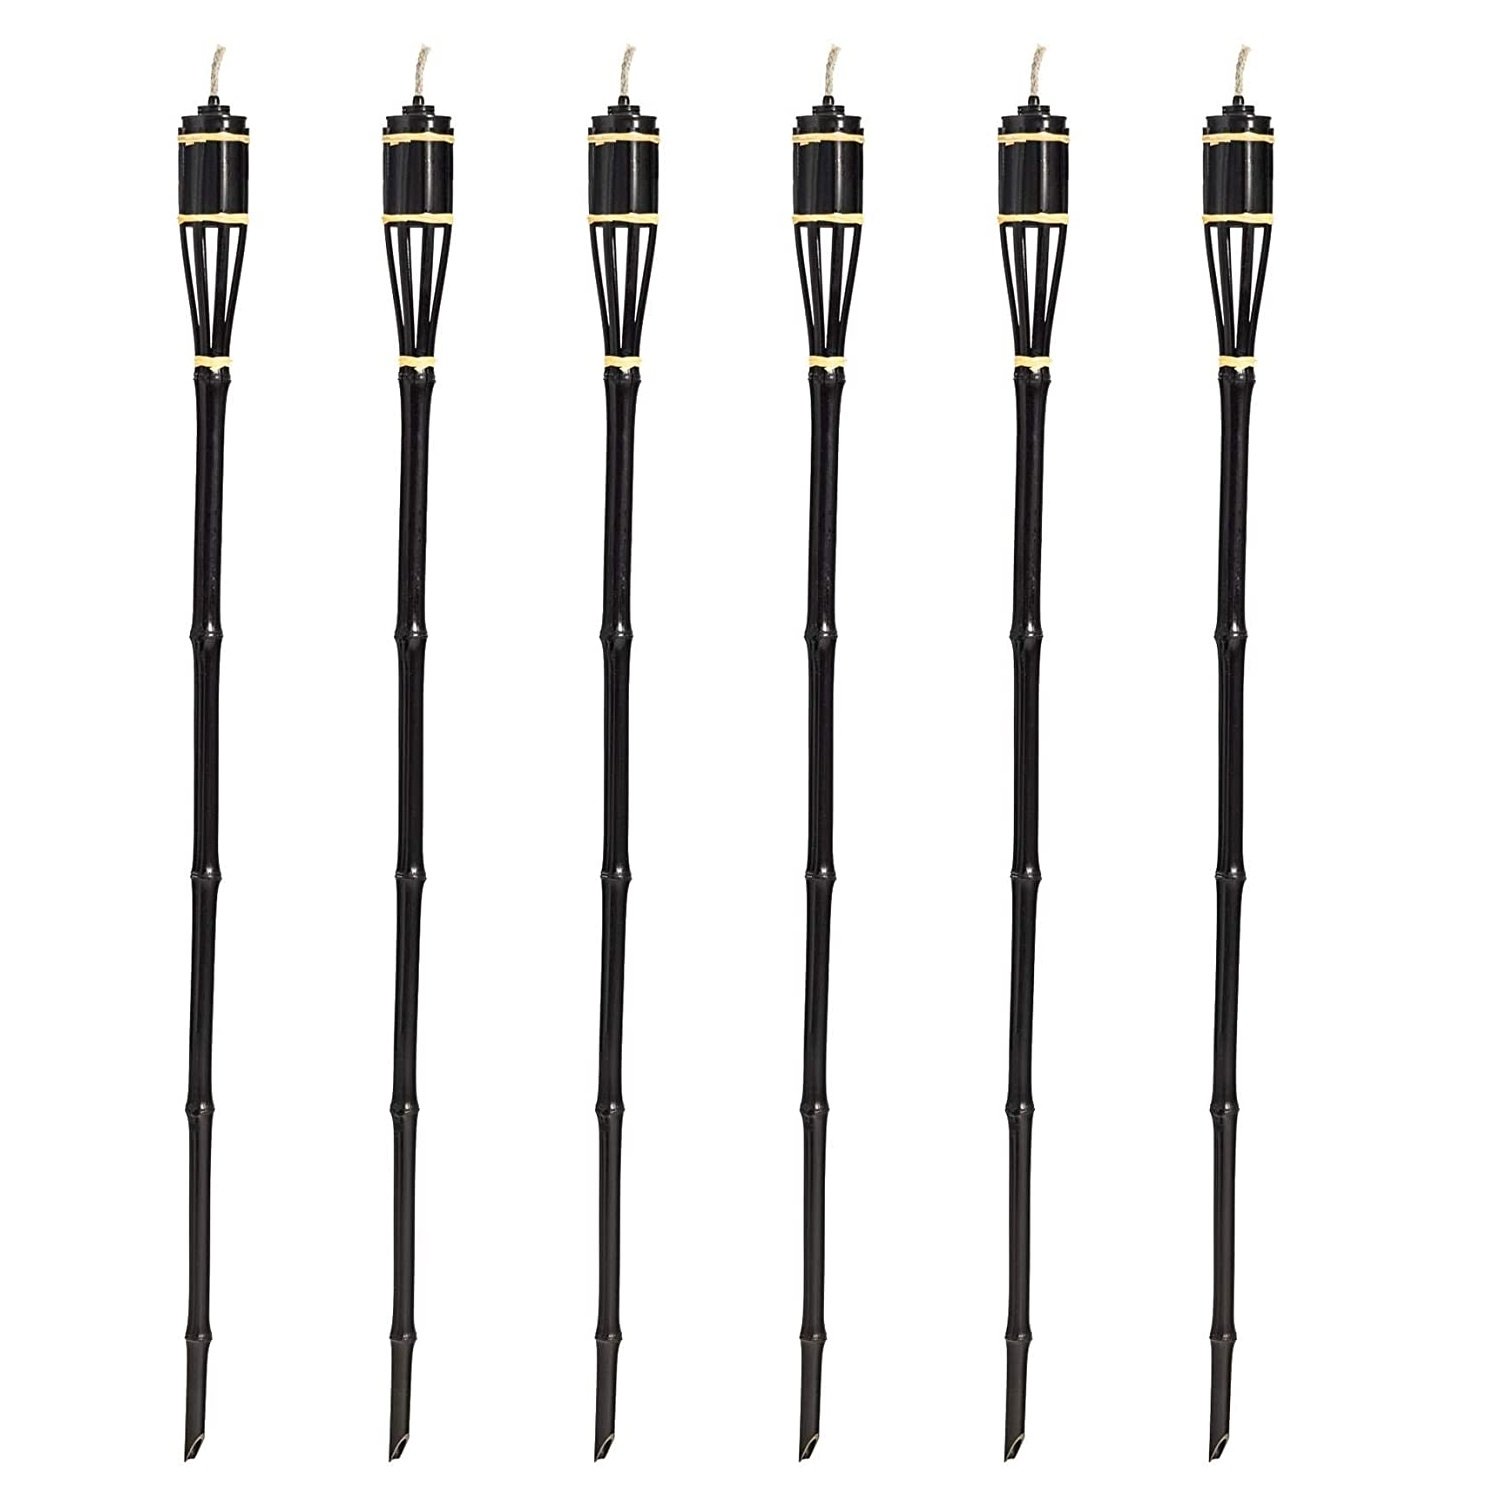 Pack of 6 Bamboo Outdoor Garden Tiki Torches Oil Lamps Fire Lanterns - 114cm